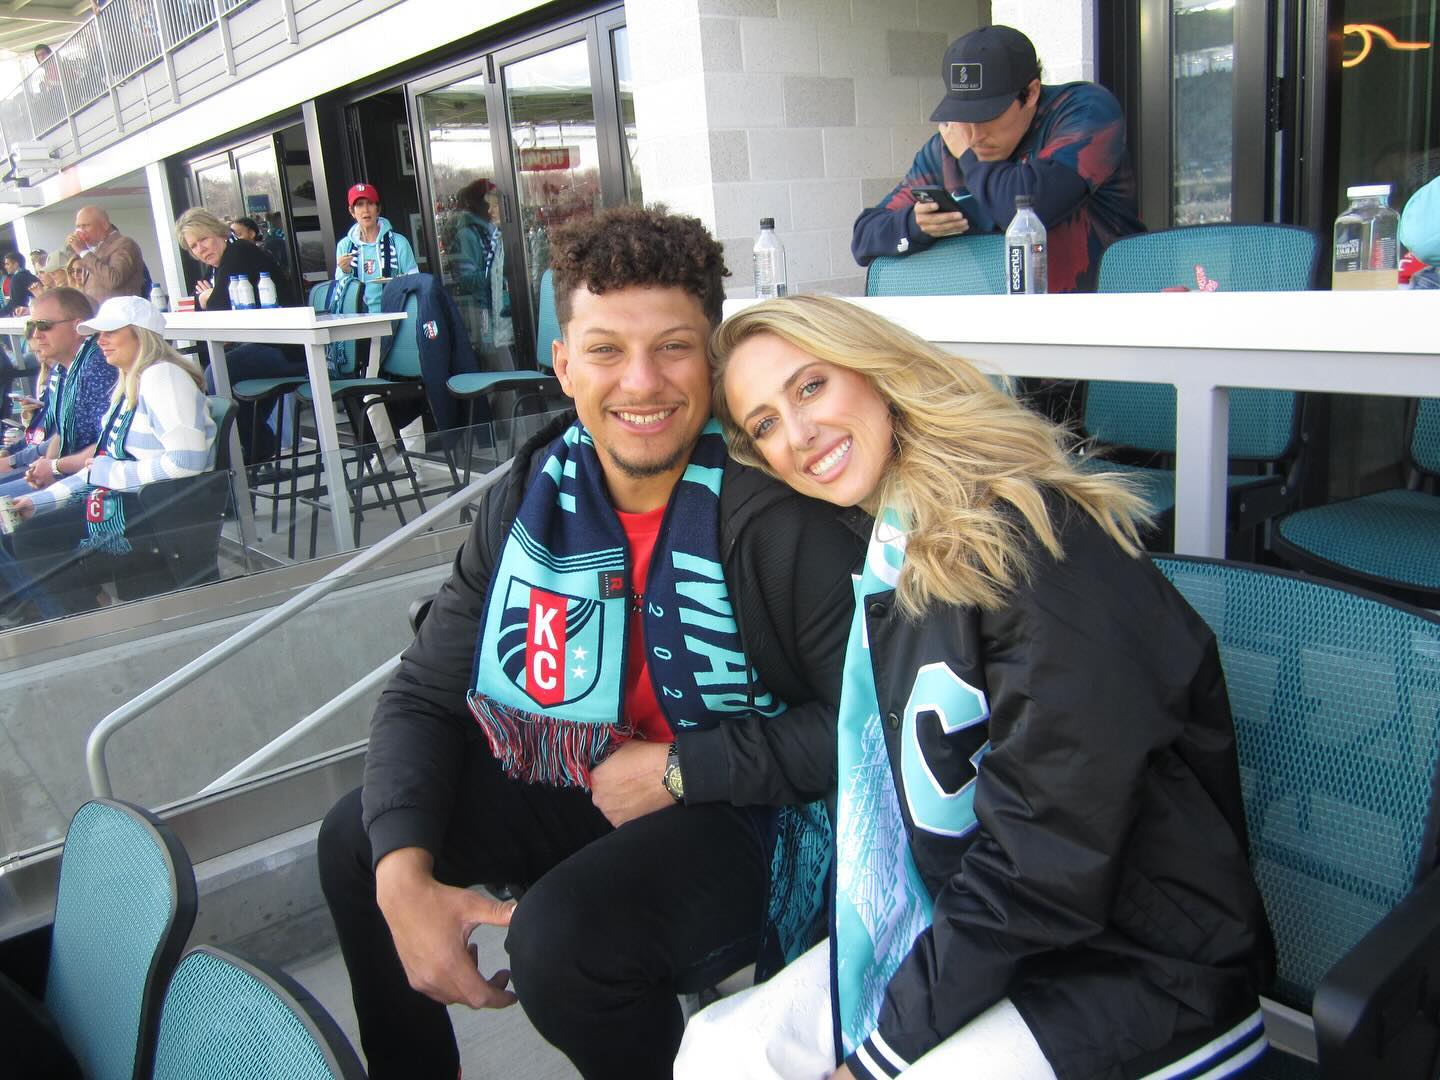 Patrick and Brittany Mahomes are part owners in NWSL side, the Kansas City Current